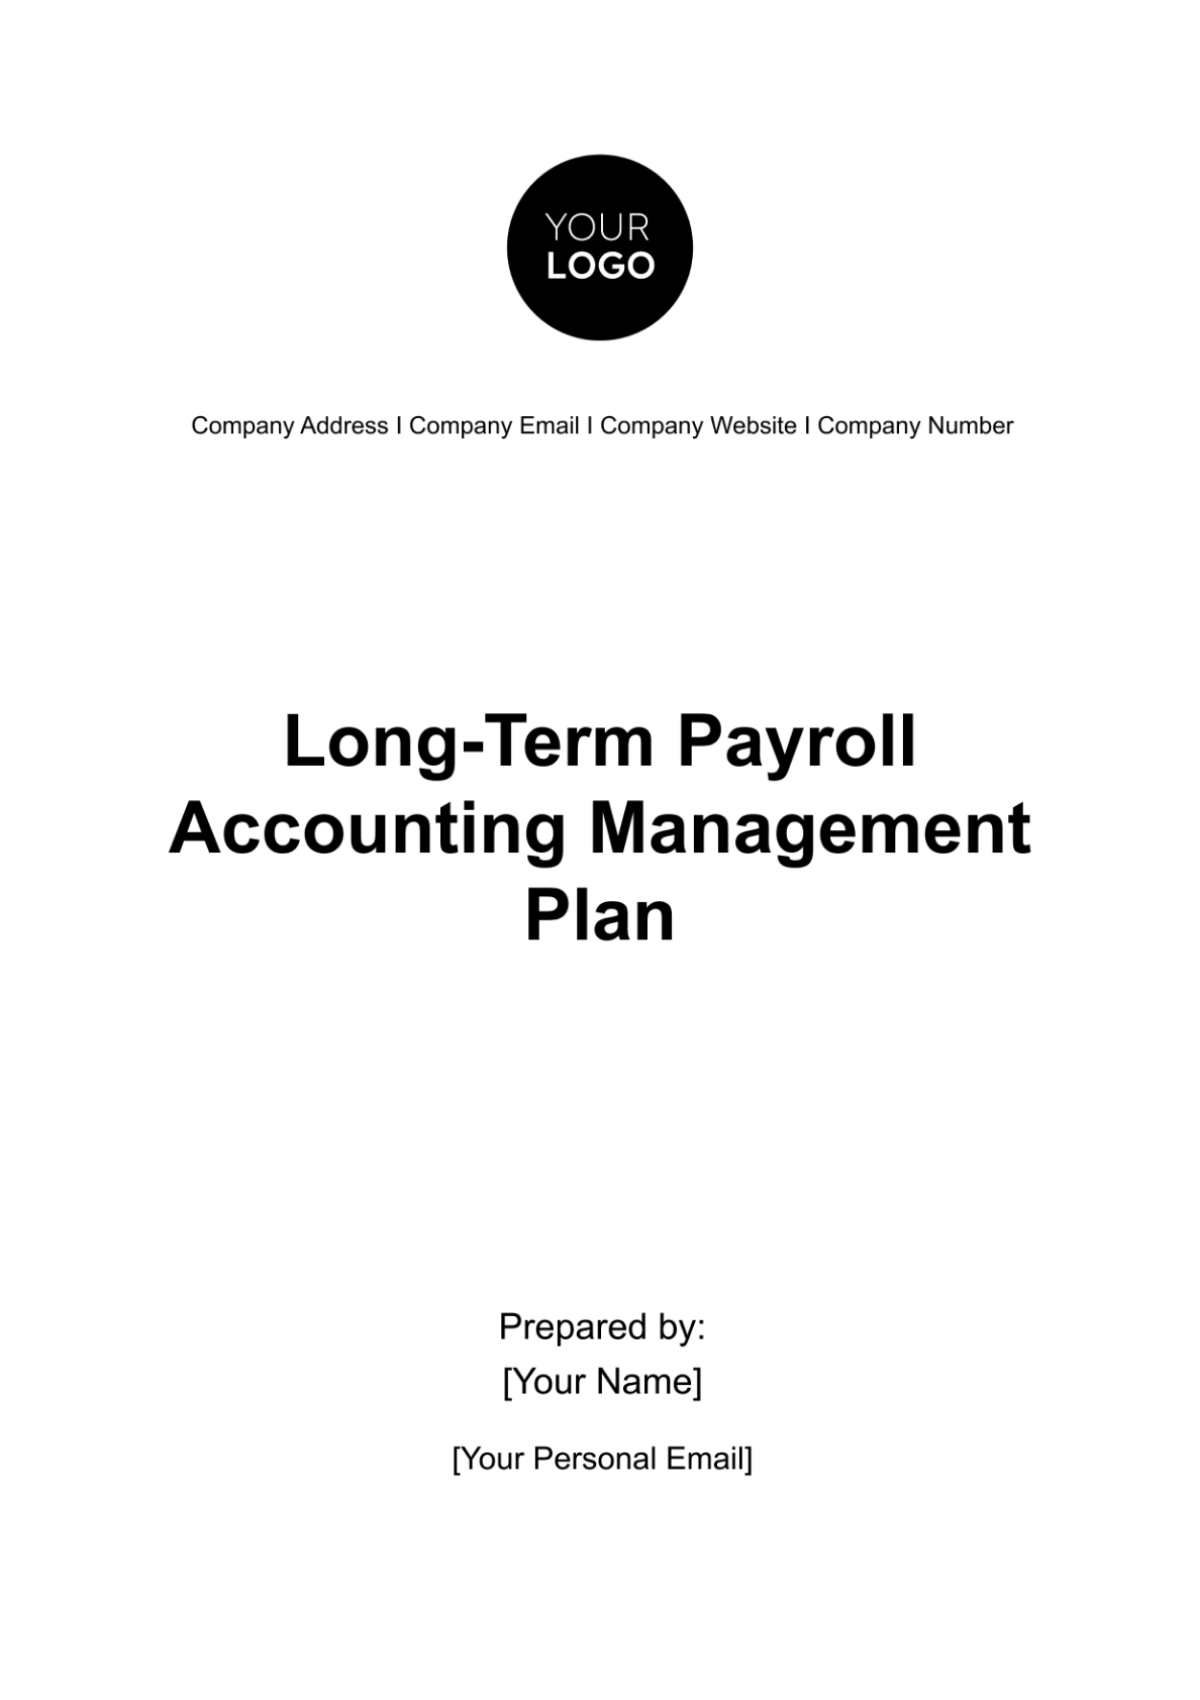 Free Long-Term Payroll Accounting Management Plan Template